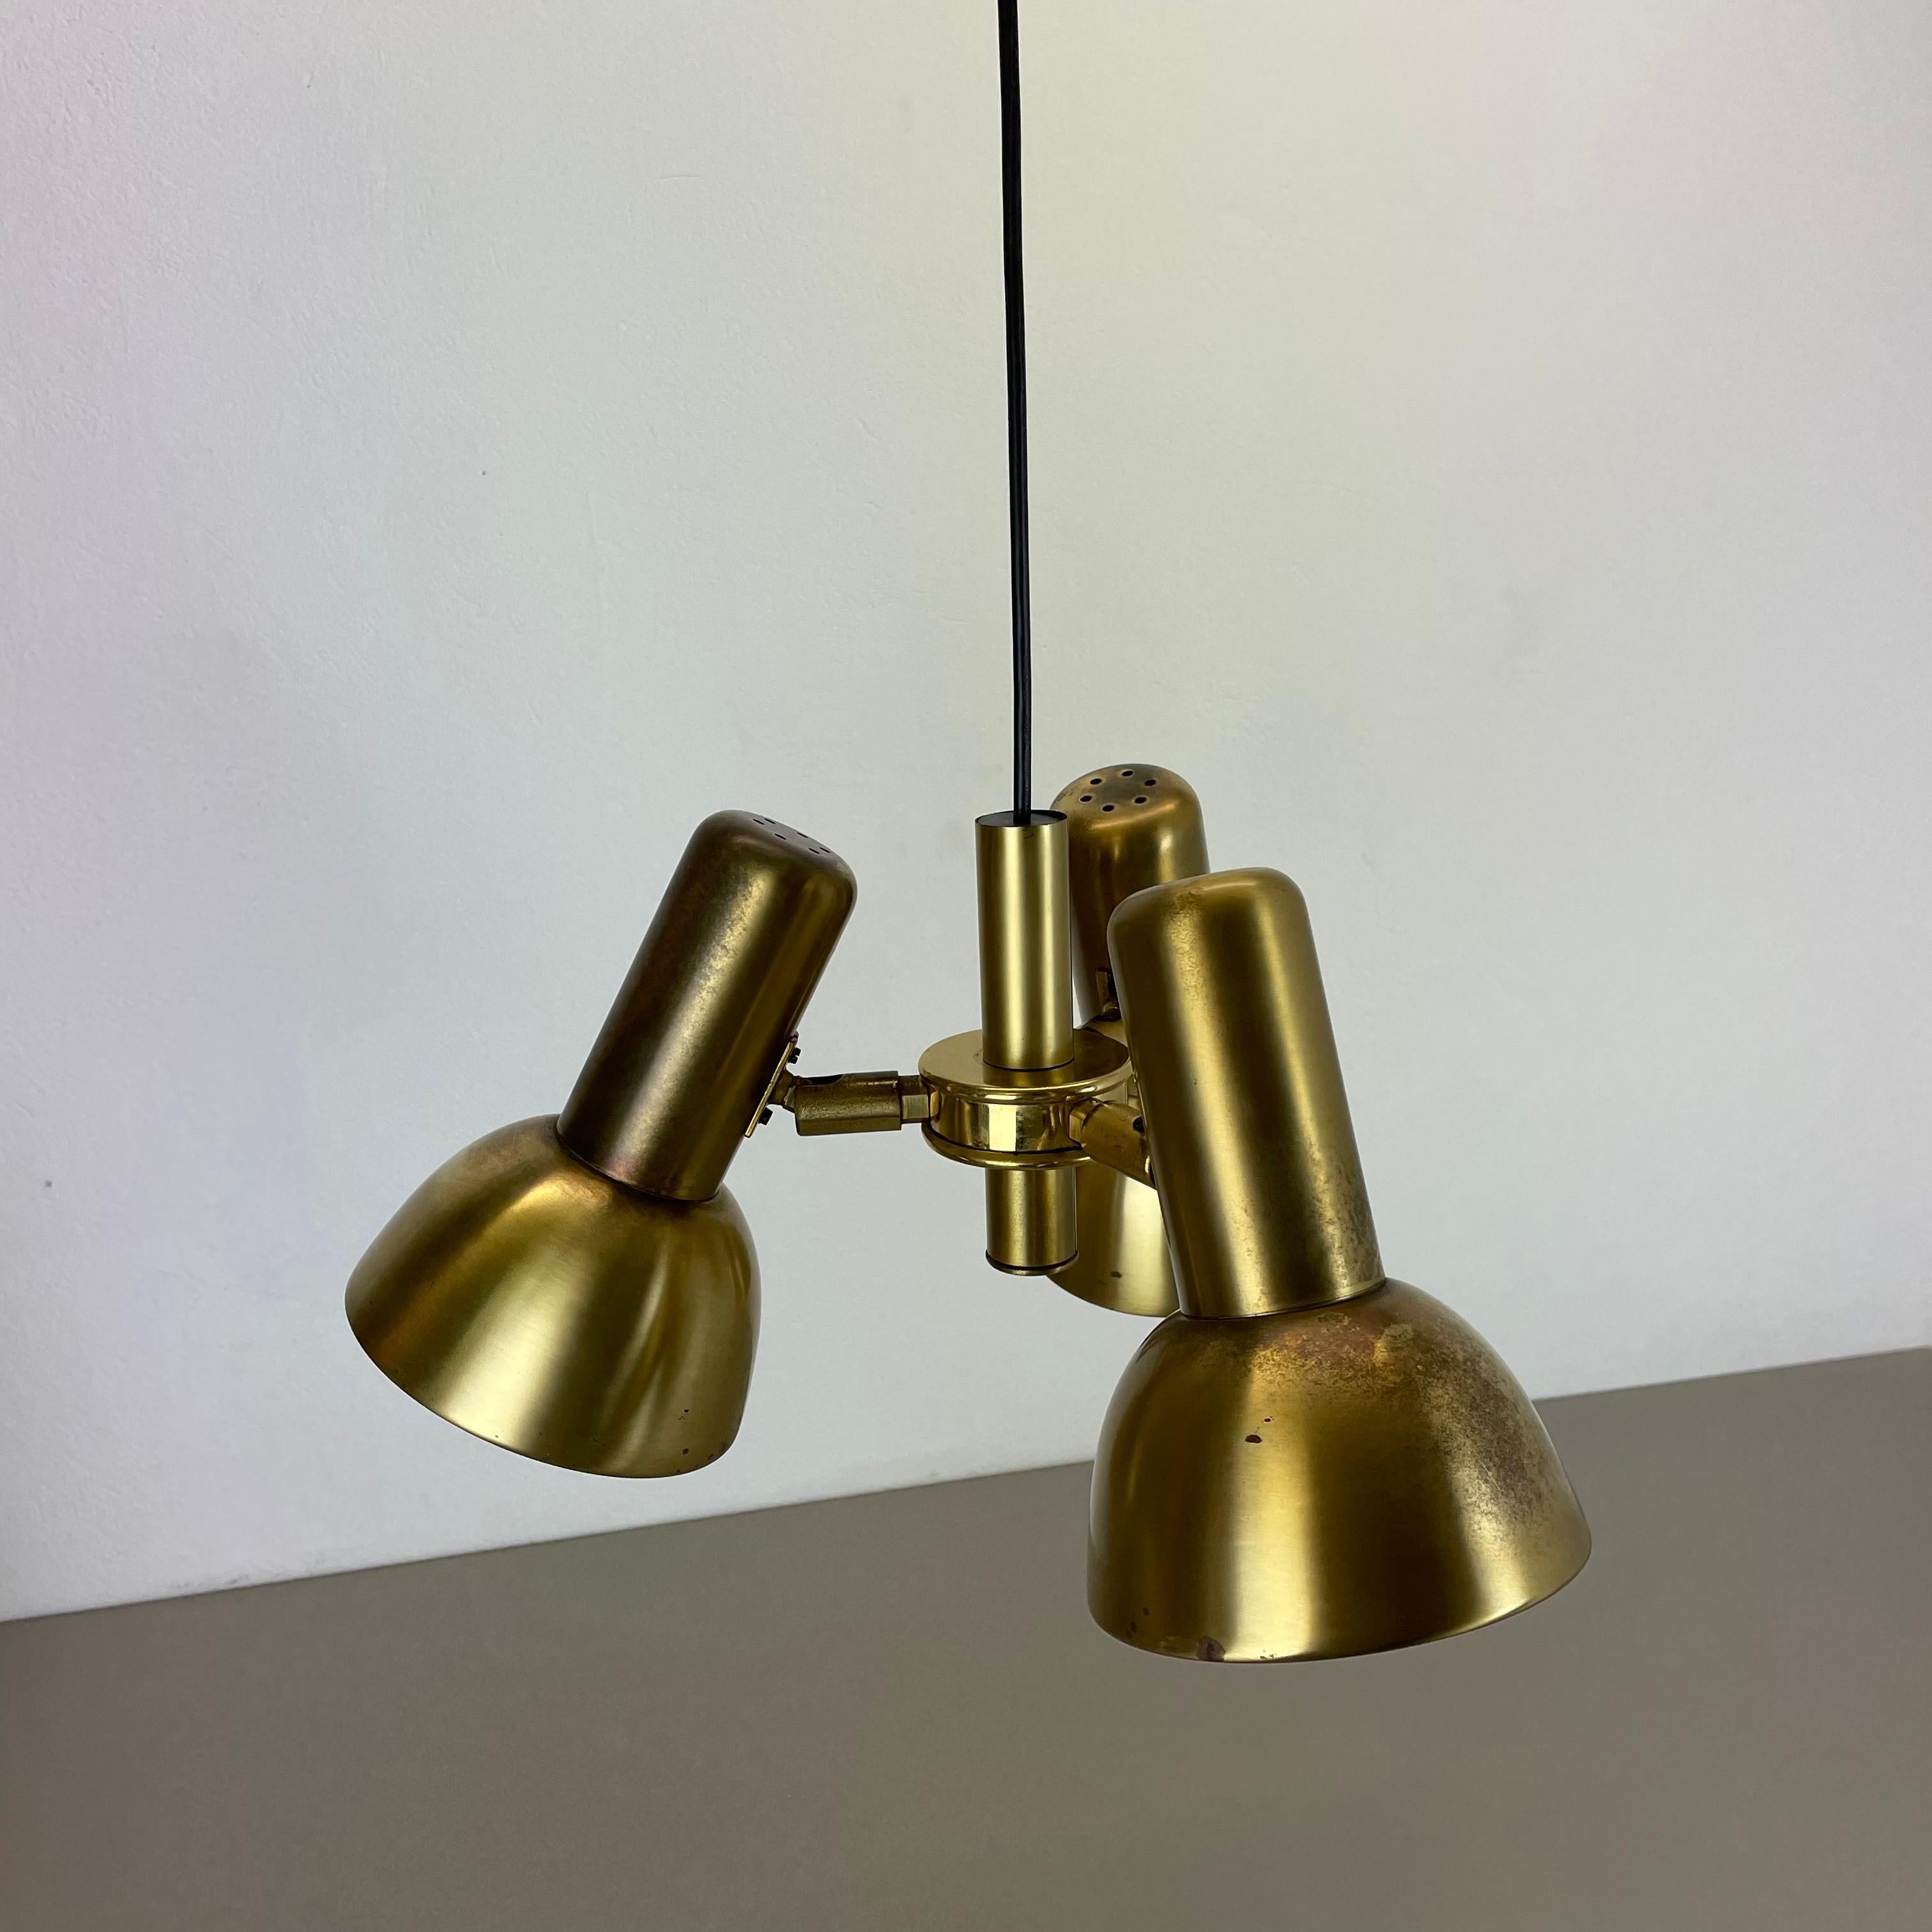 3-Spot Brass Tone Hanging Light Koch and Lowy Style OMI Lighting, Germany, 1970 In Fair Condition For Sale In Kirchlengern, DE